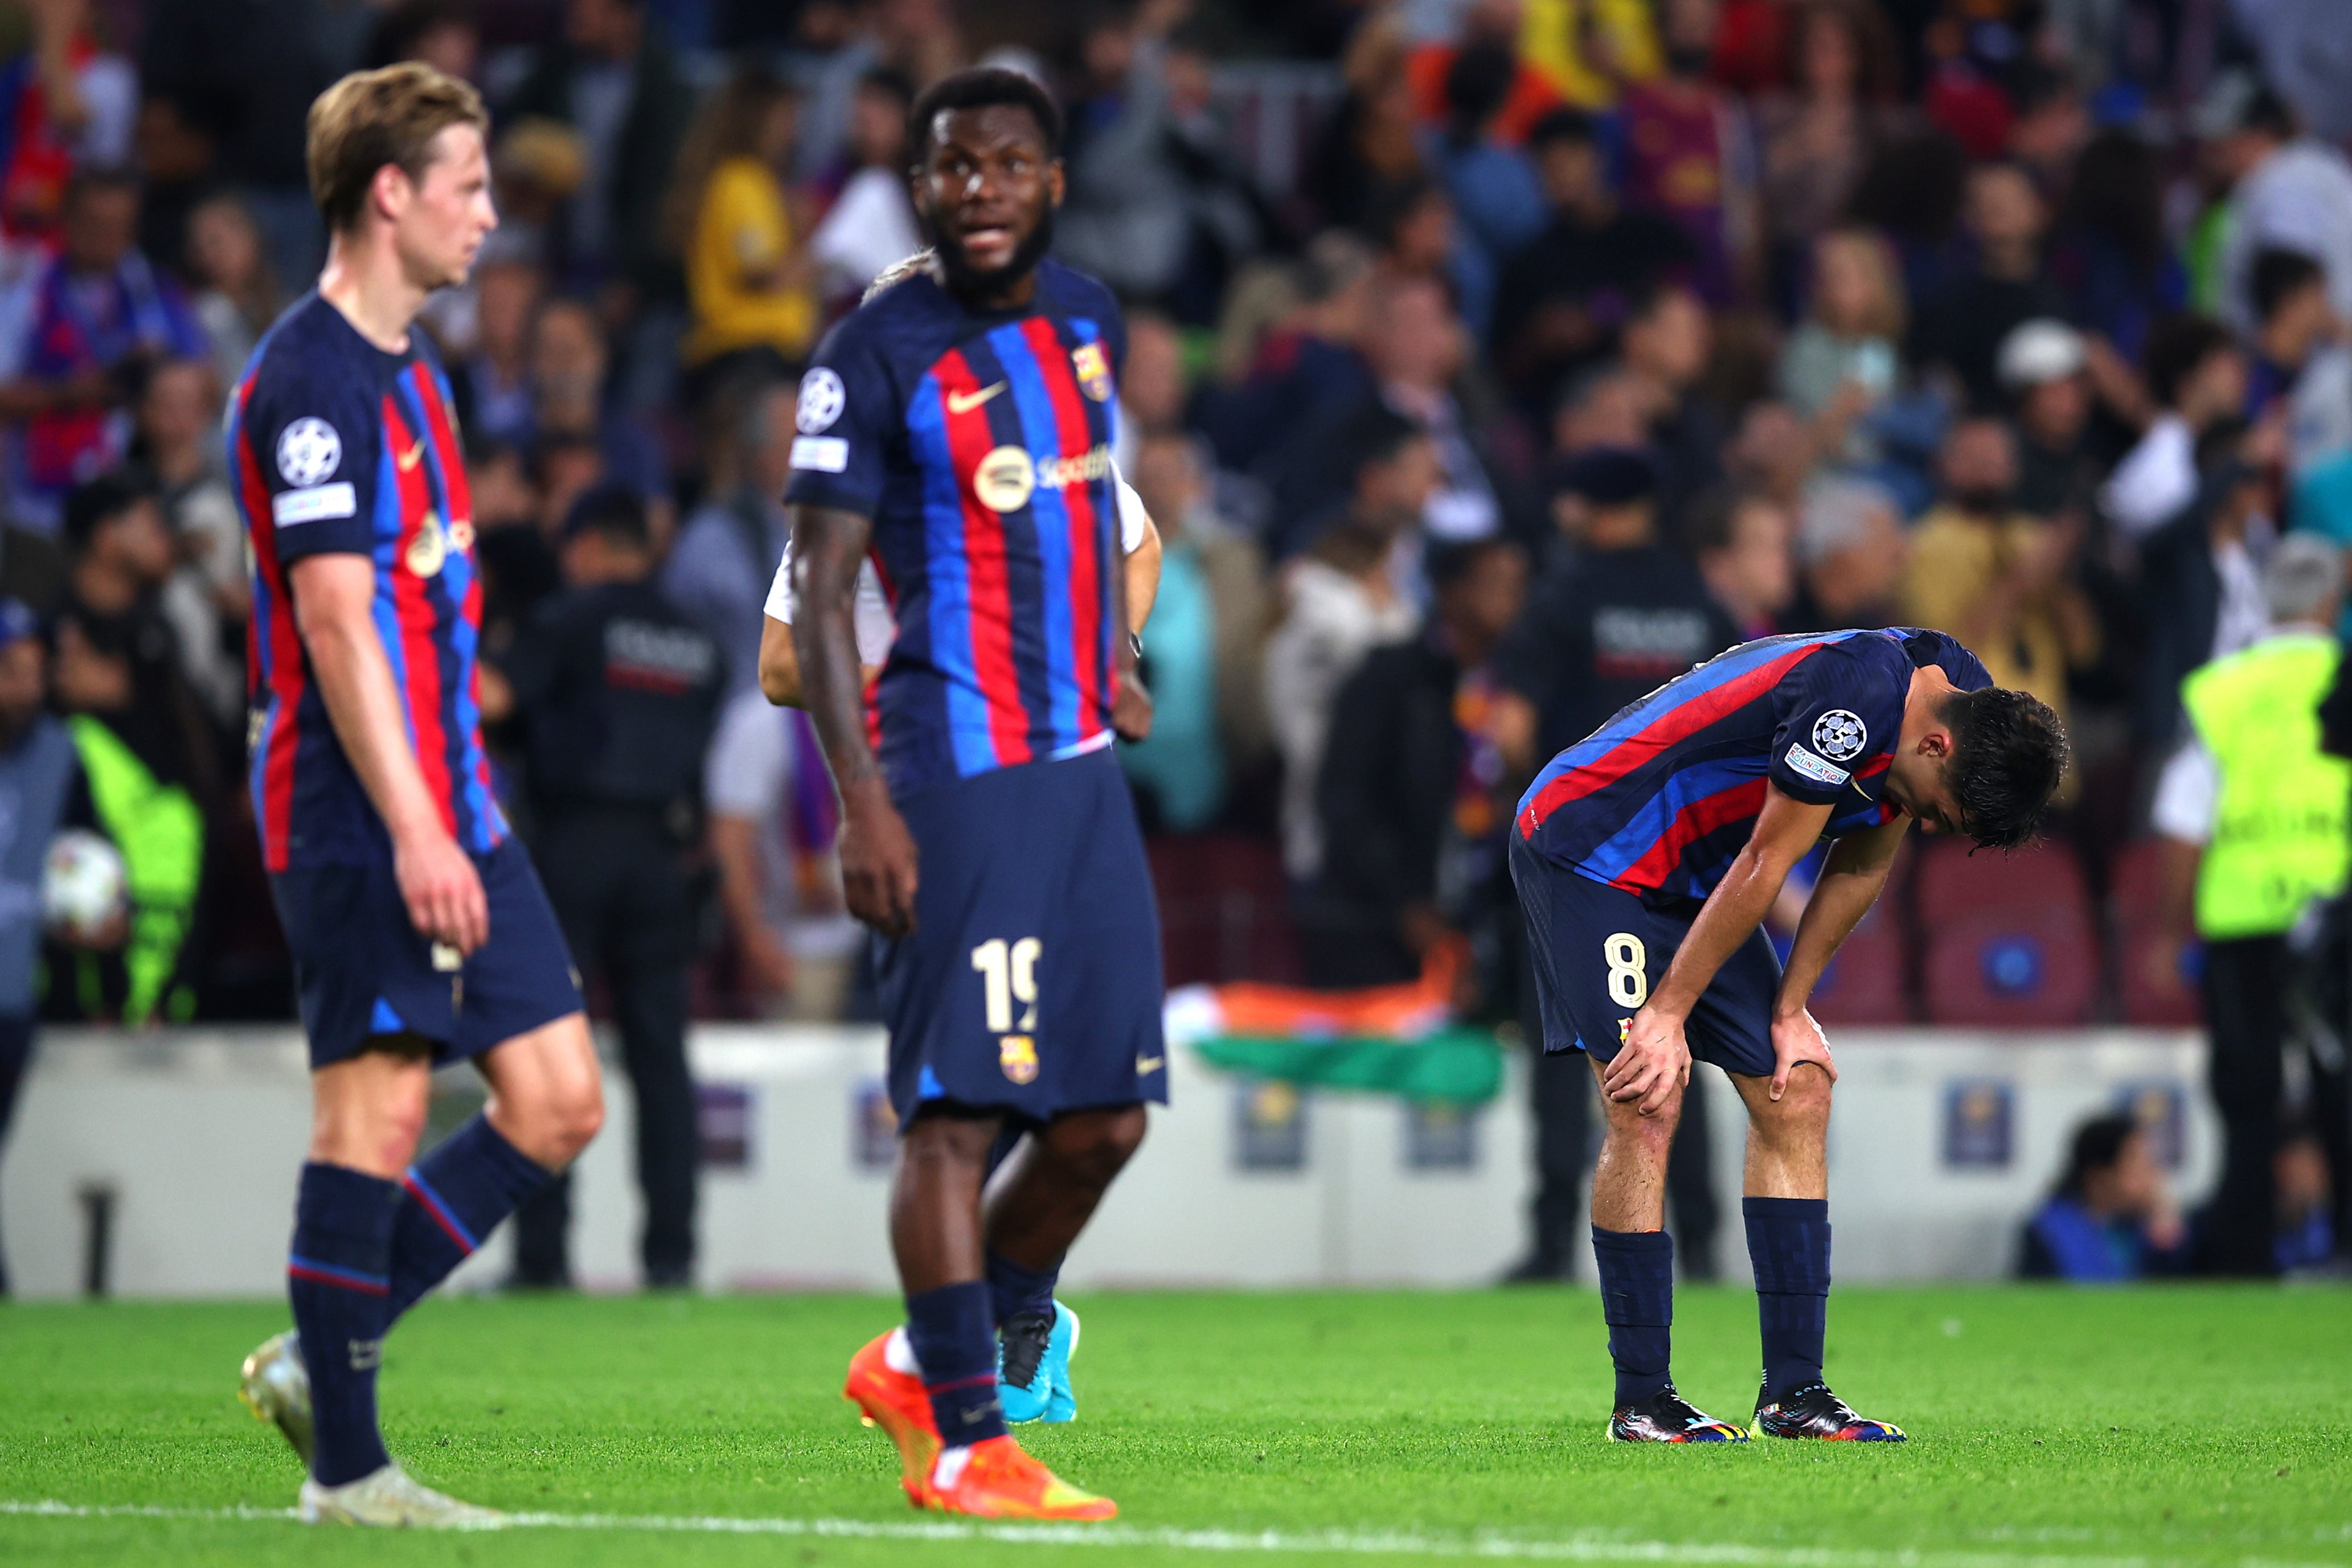 Barcelona exited the Champions League at the group stage last year